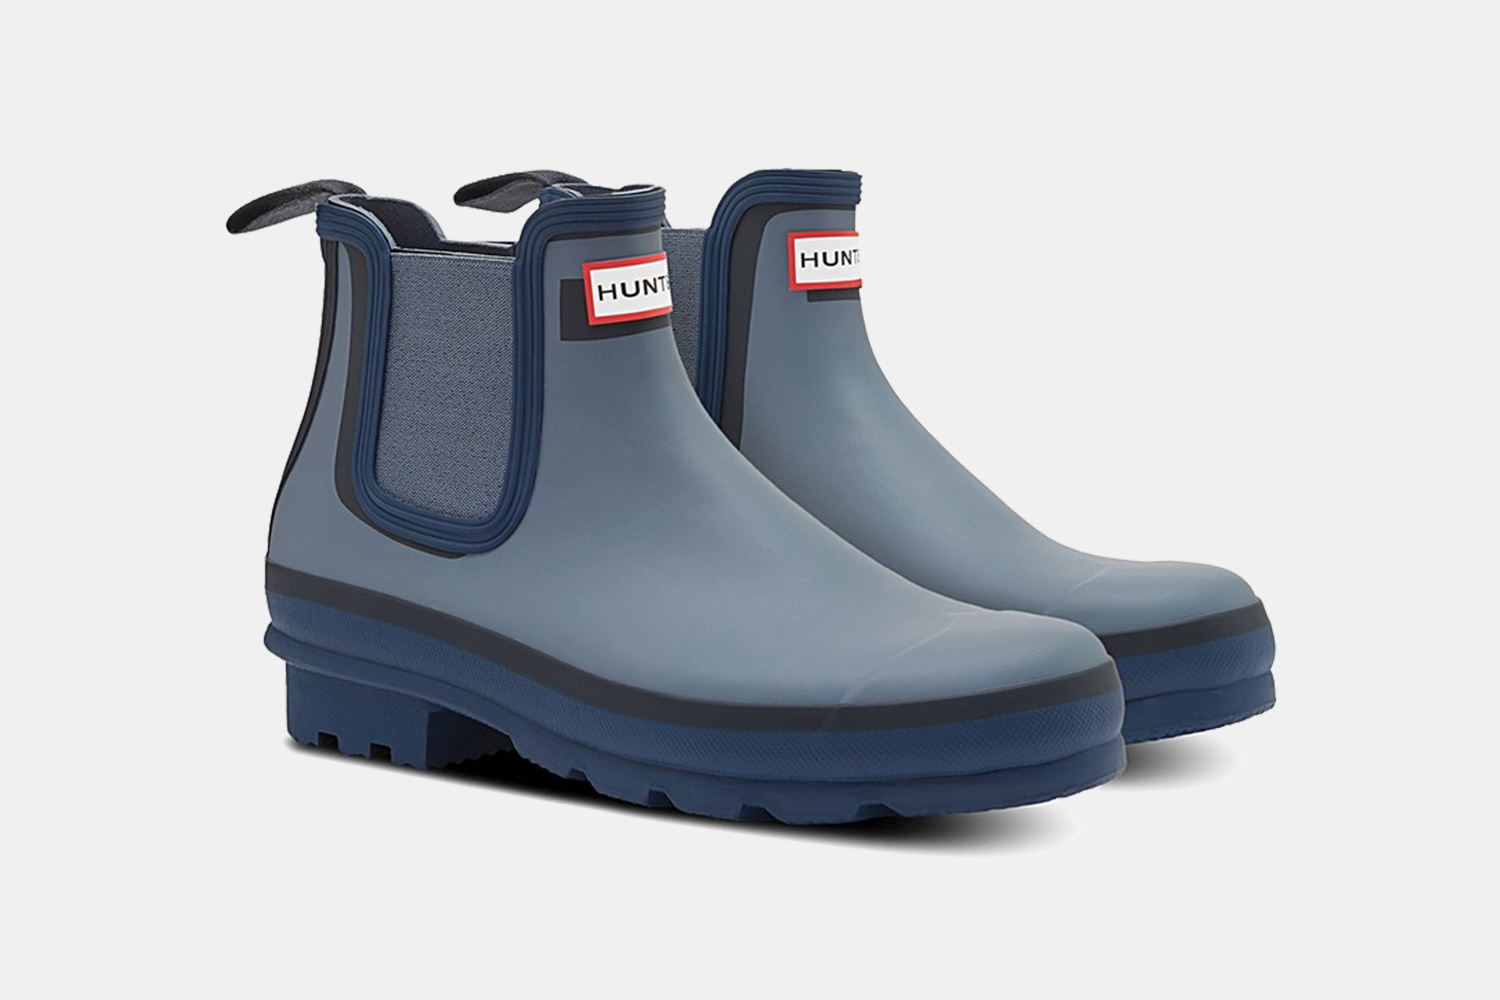 Hunter Chelsea Waterproof Rain Boots in Blue and Grey Discount